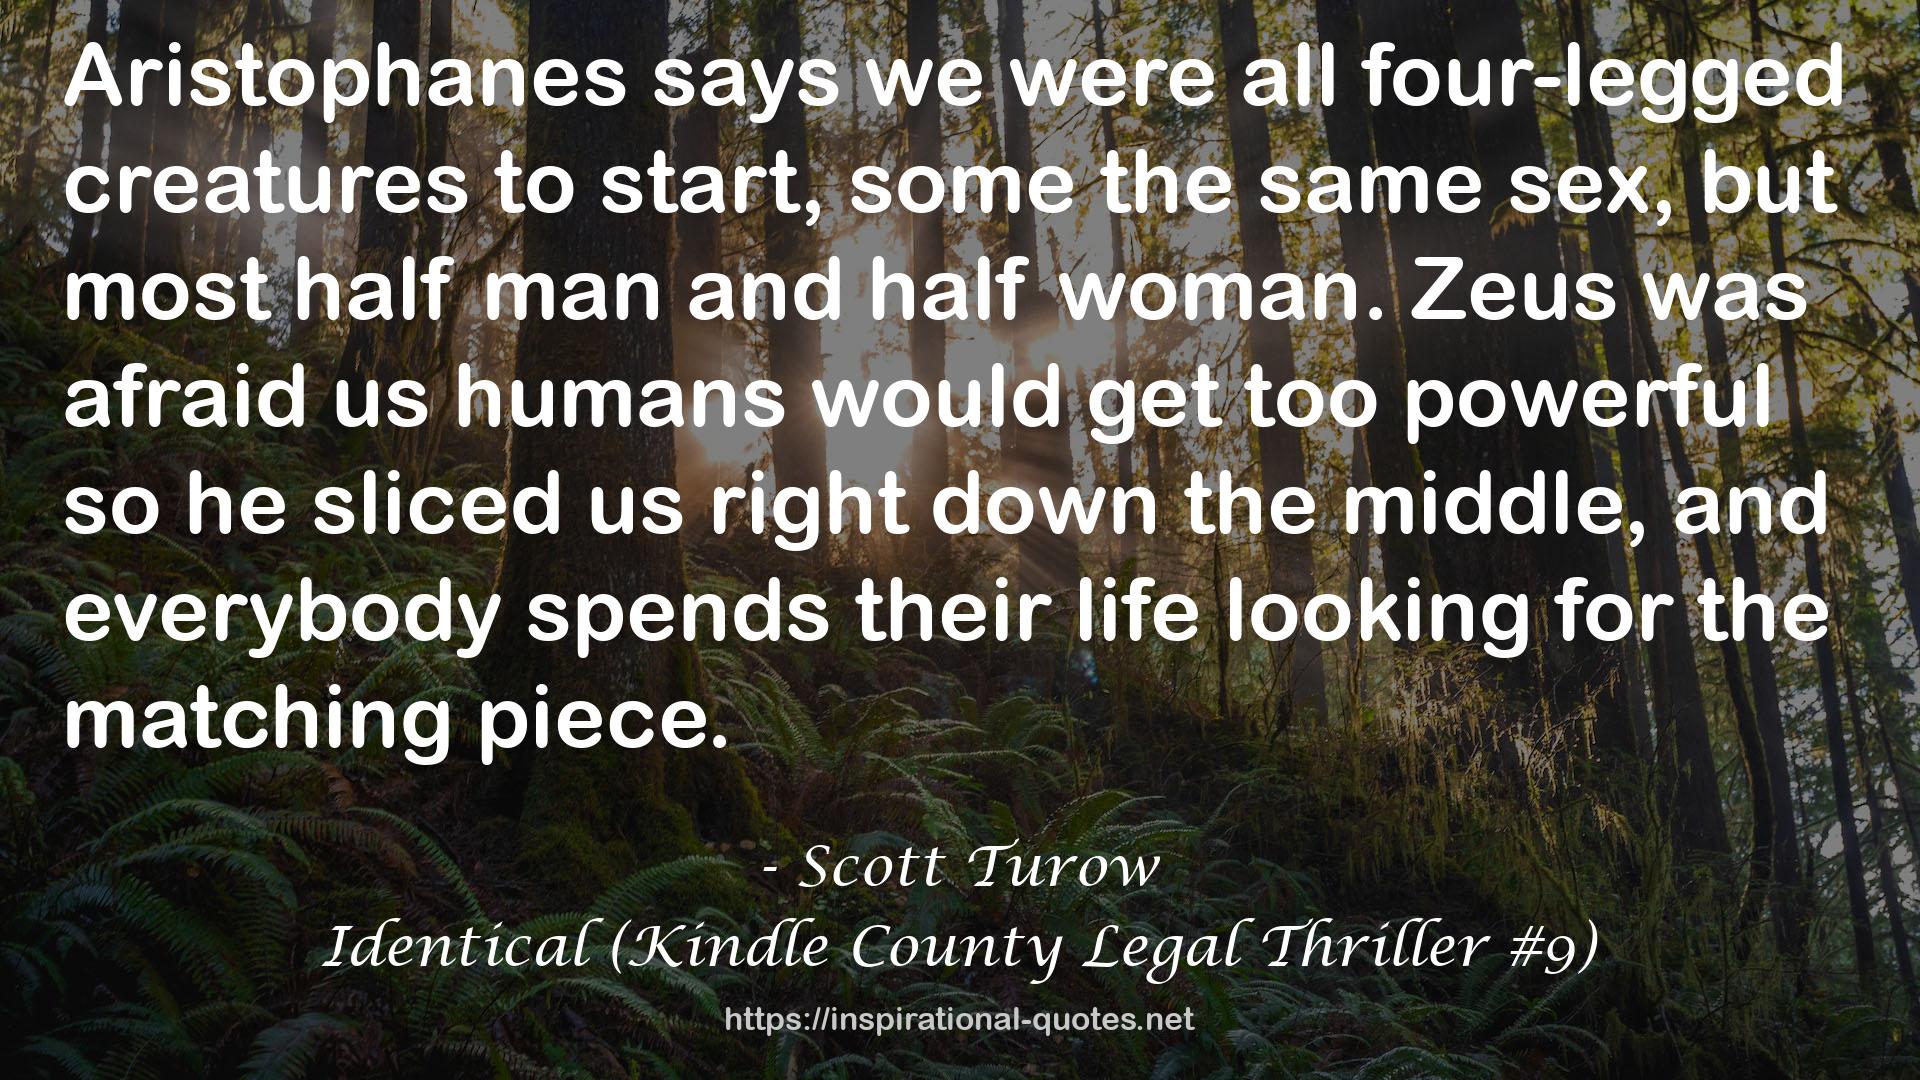 Identical (Kindle County Legal Thriller #9) QUOTES